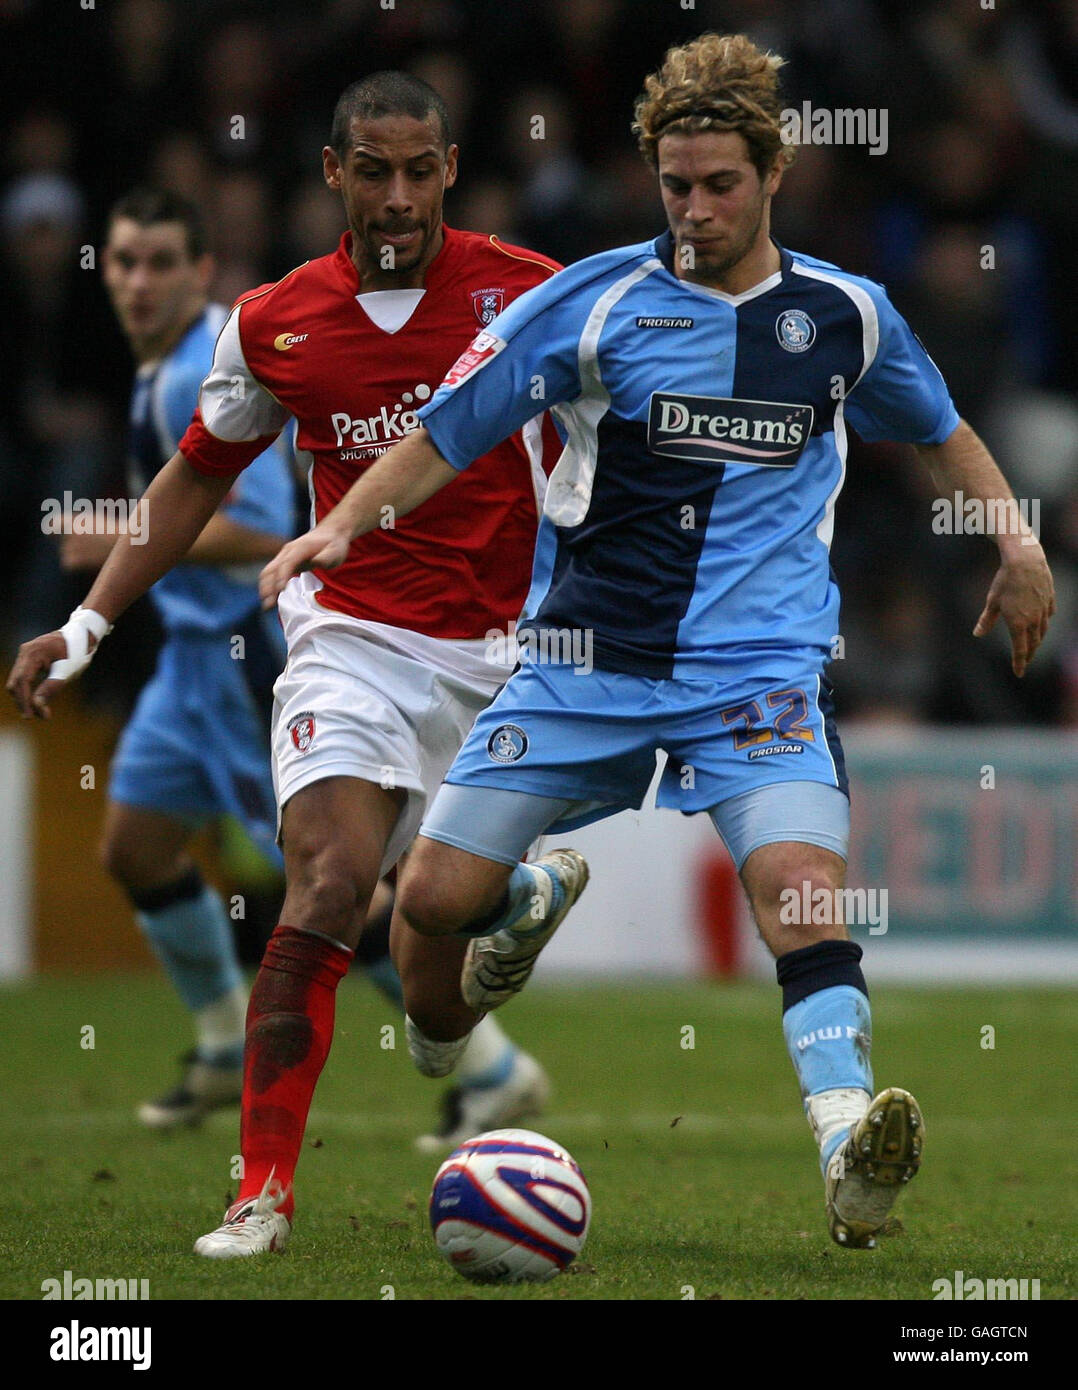 Rotherham United's Marc Joseph and Wycombe Wanderers' Sergio Torres during the Coca-Cola League Two match at Millmoor, Rotherham. Stock Photo